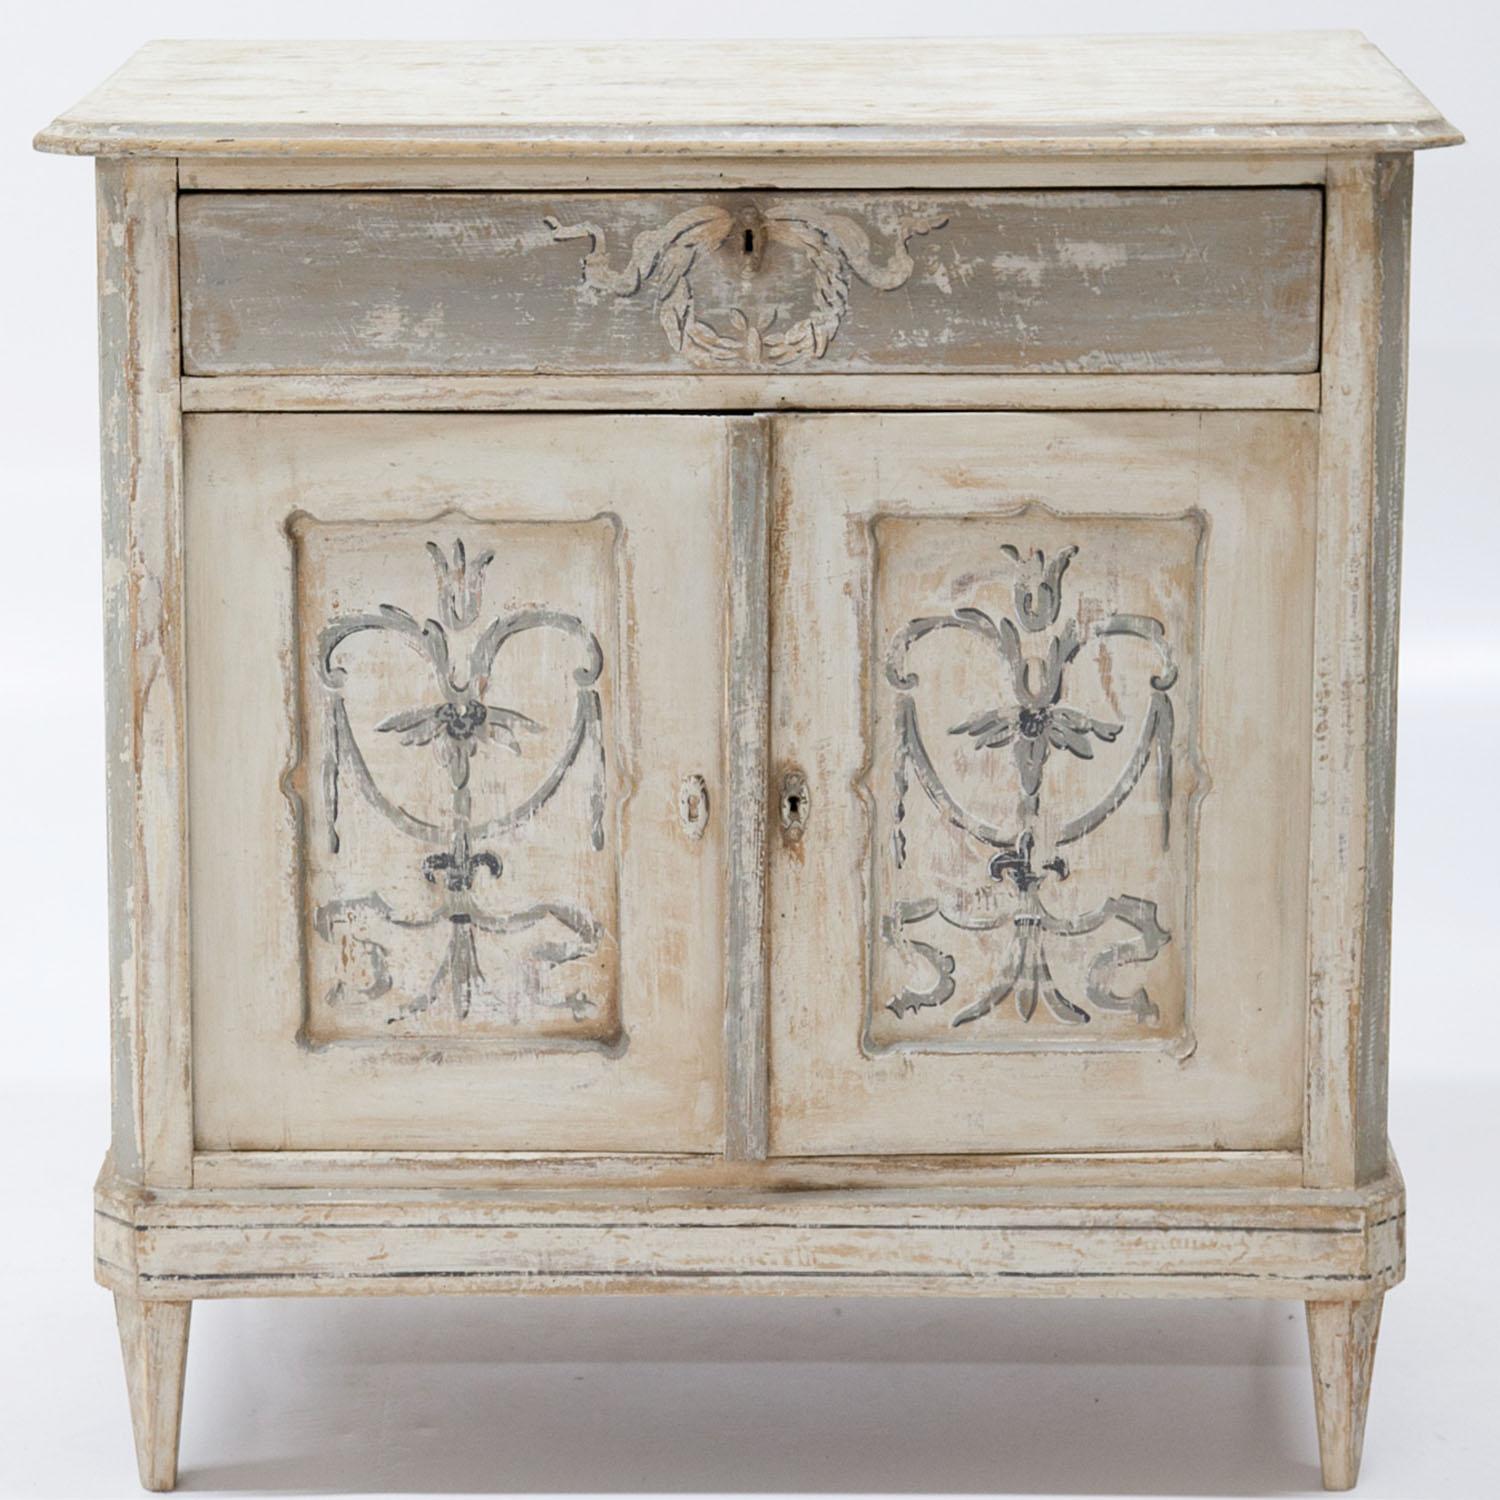 Biedermeier cabinet standing on tapered feet with two doors and one top drawer. The body with slanted corners and wavy fillings on the doors. The crème-white paint with grey décors was redone and has a worn look to it.